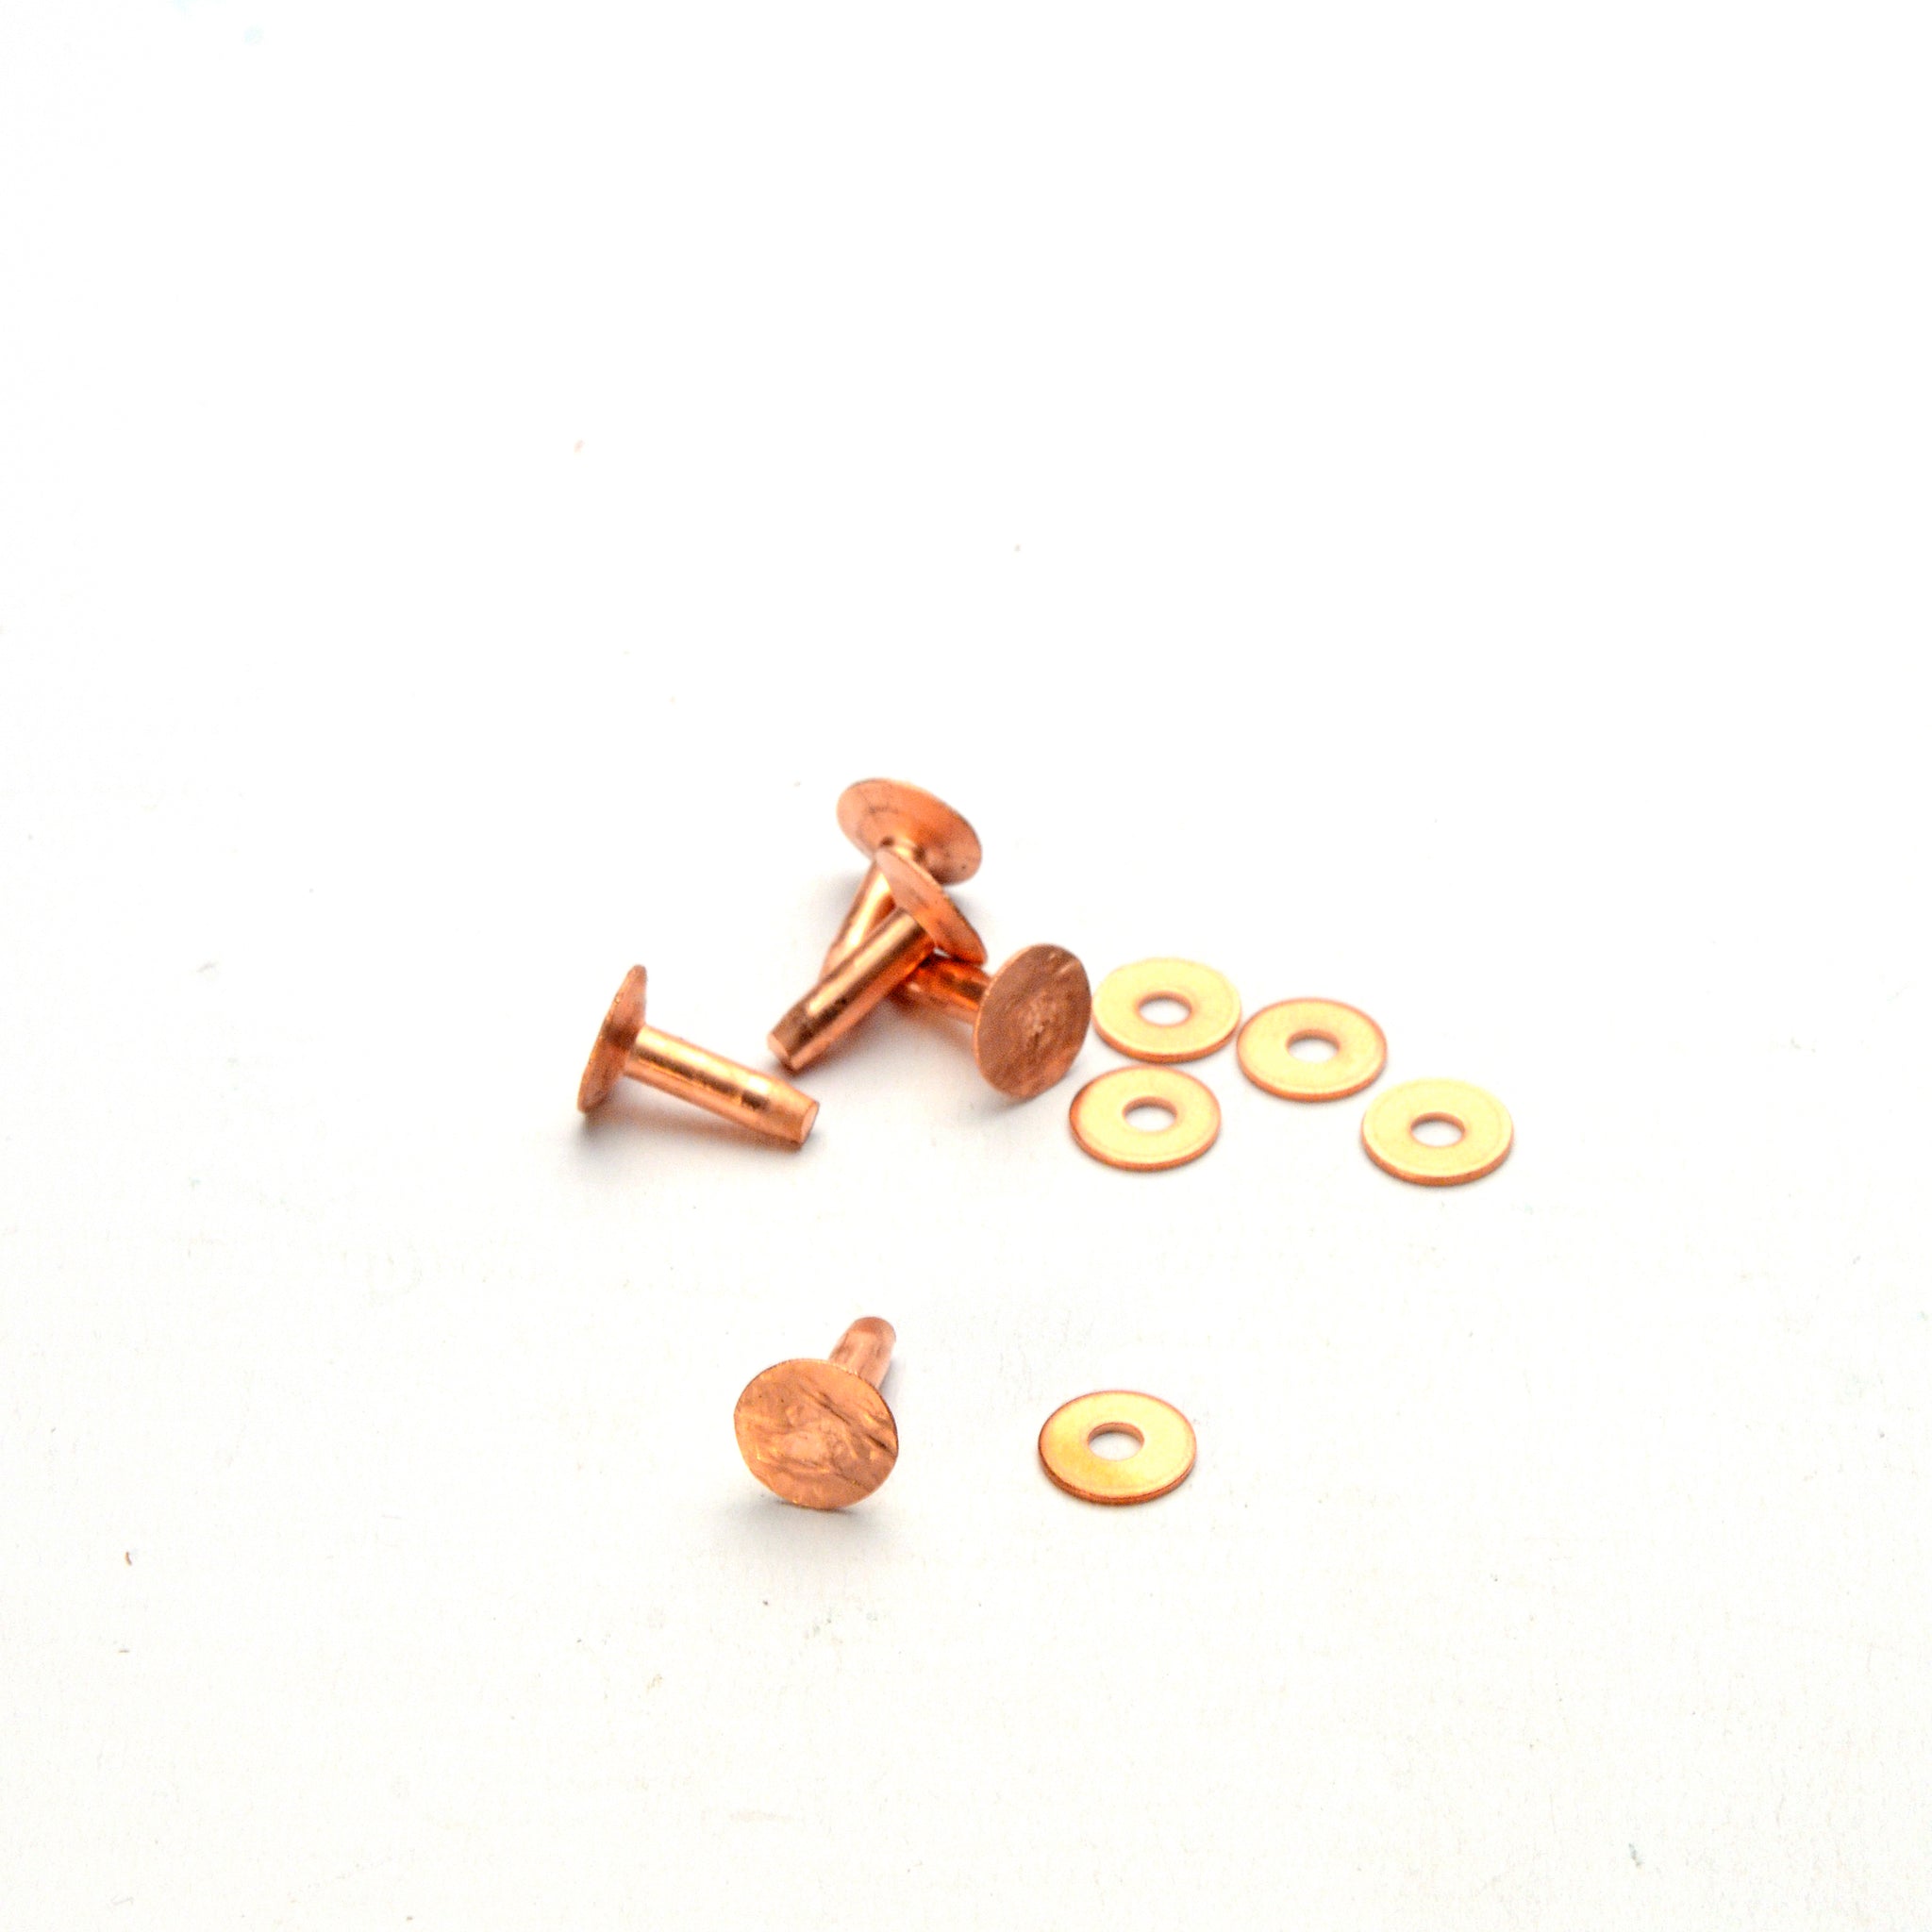 Traditional Copper Rivets from Identity Leathercraft